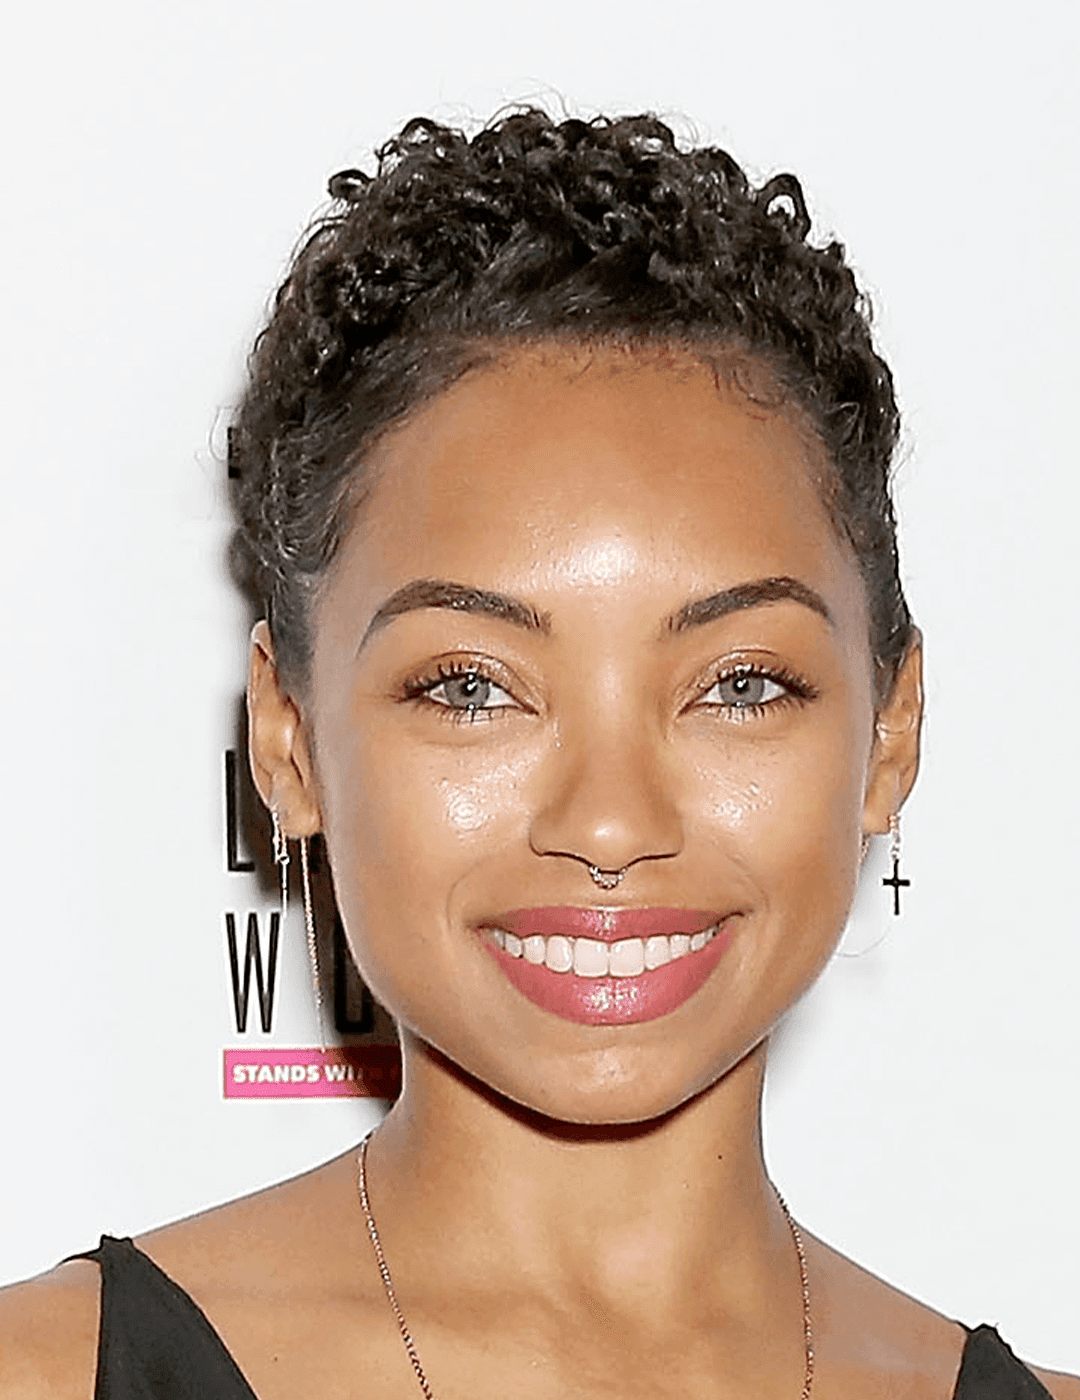 Actress Logan Browning sporting a no-makeup makeup look and curly pixie hairstyle